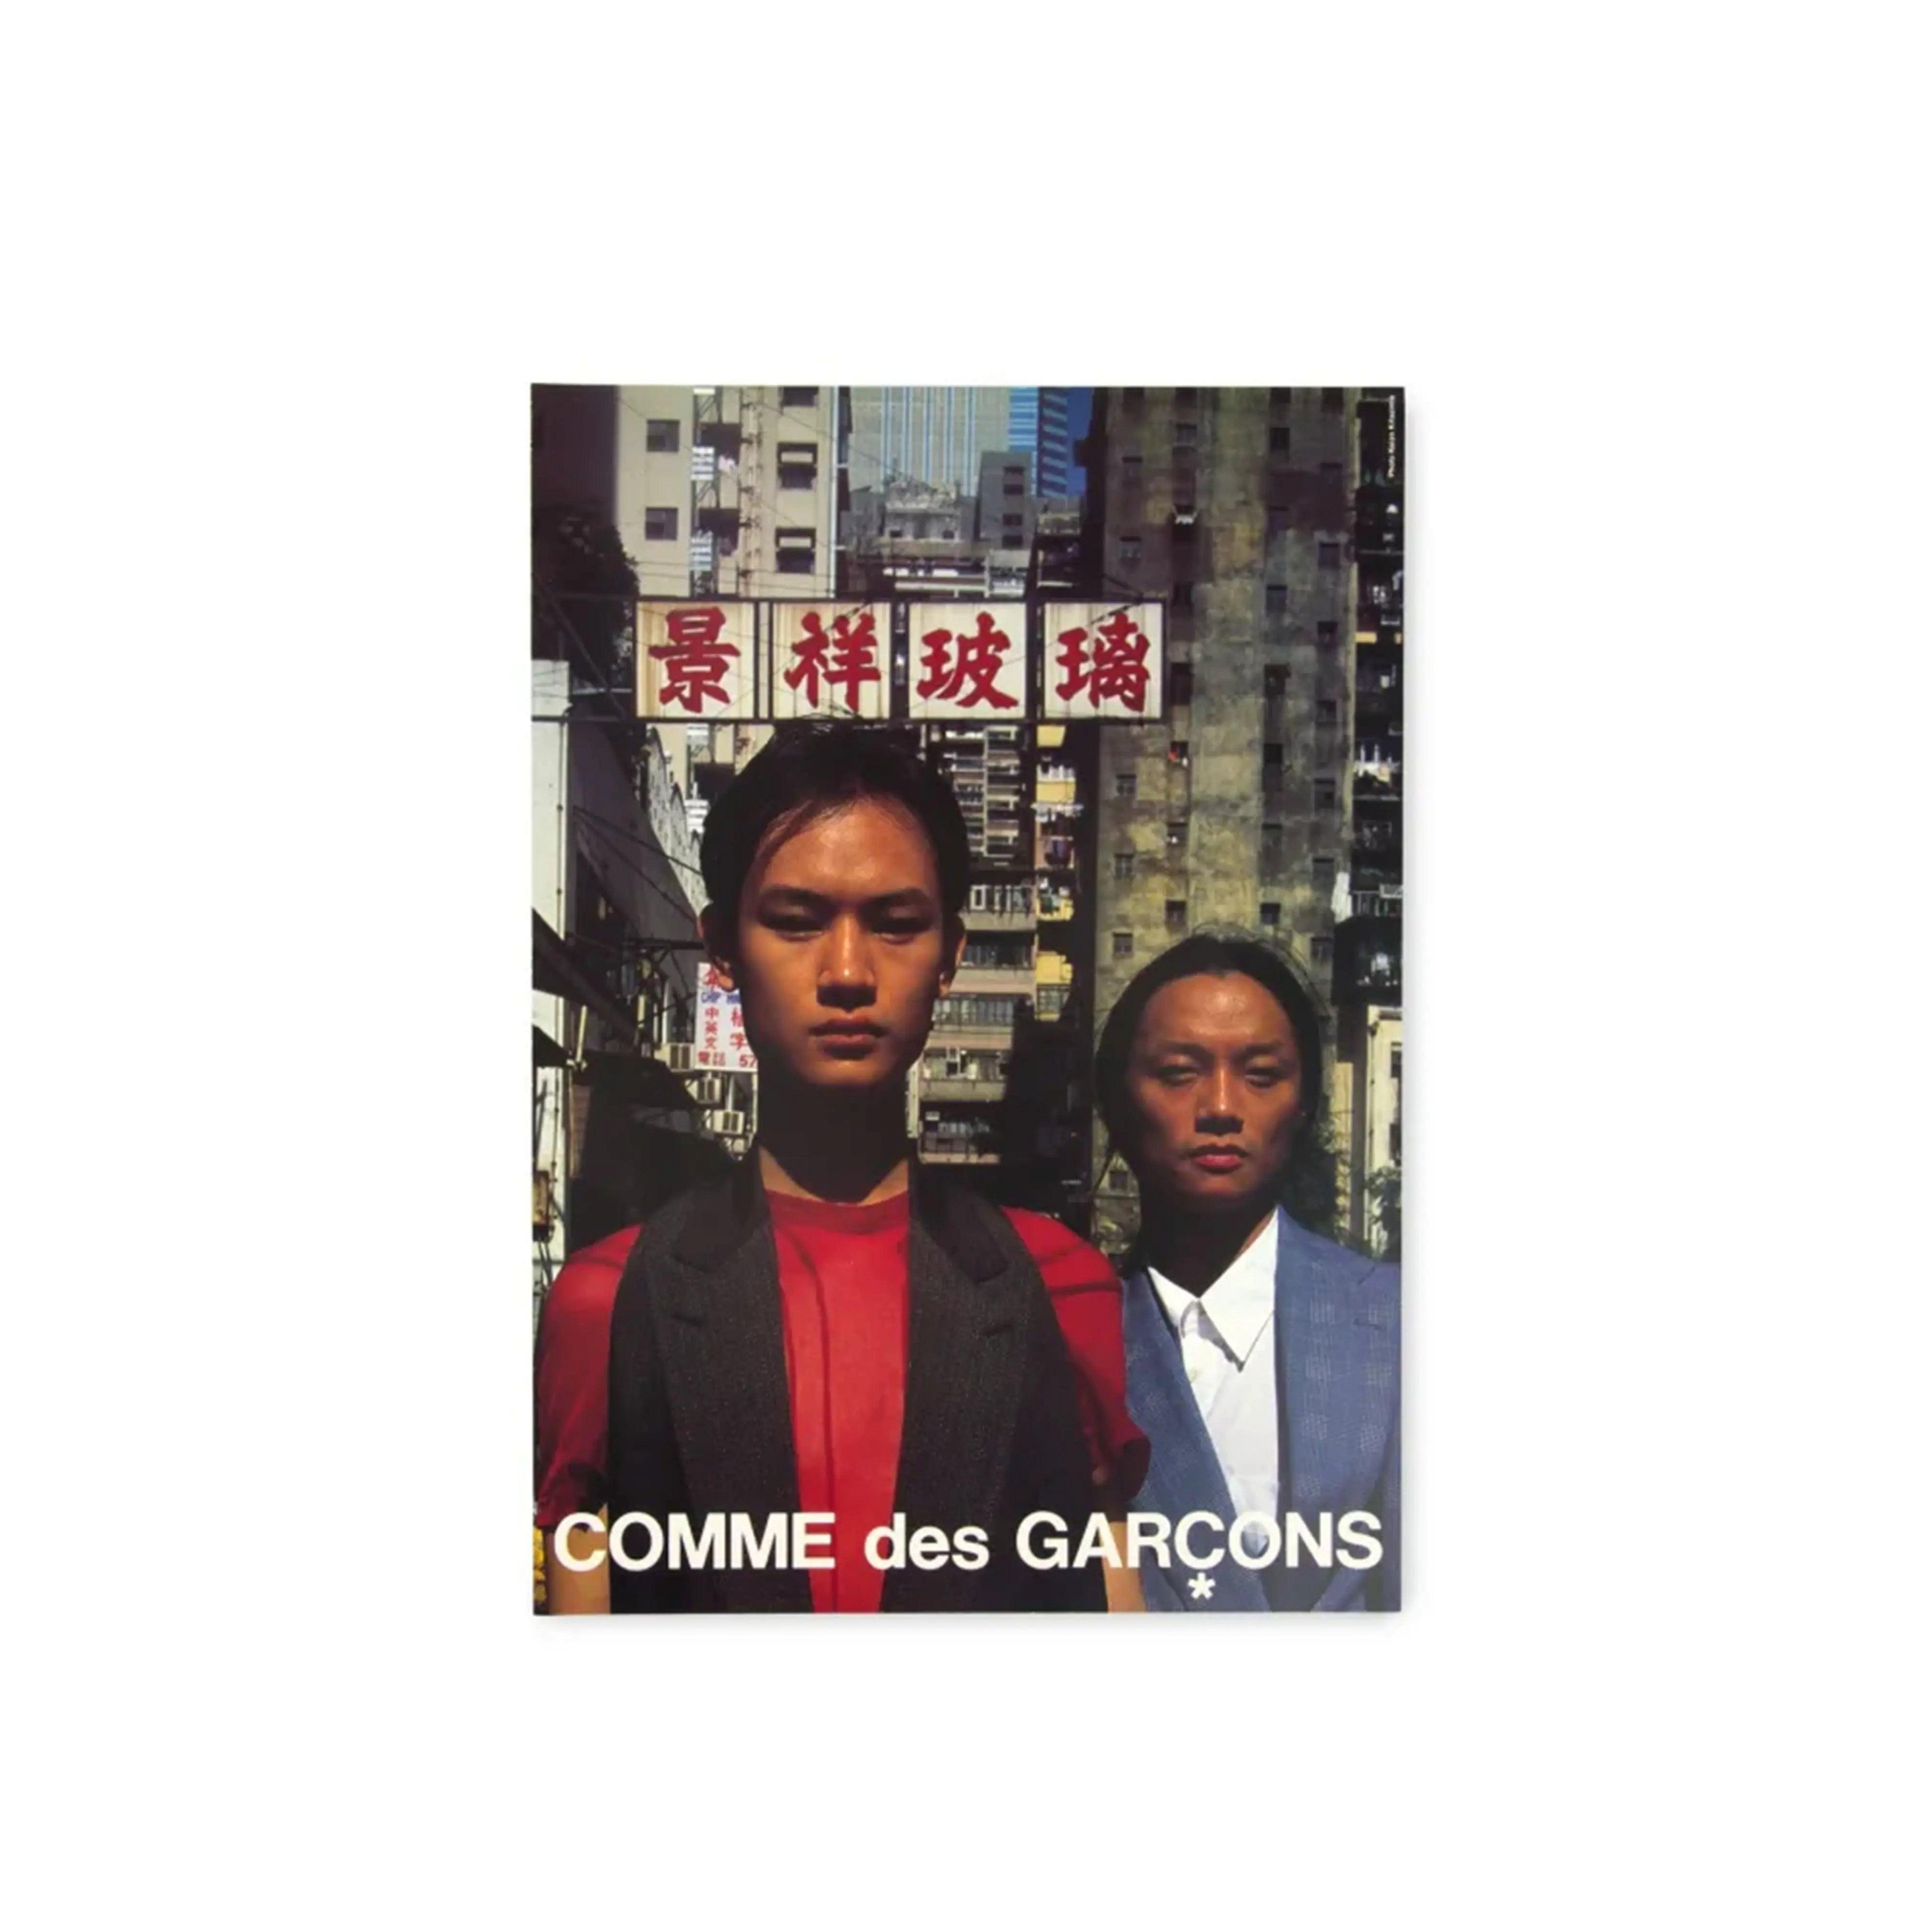 Climax Books - Keizo Kitajima, CDG Homme Ad Campaign Postcard 1995 by COMME DES GARCONS